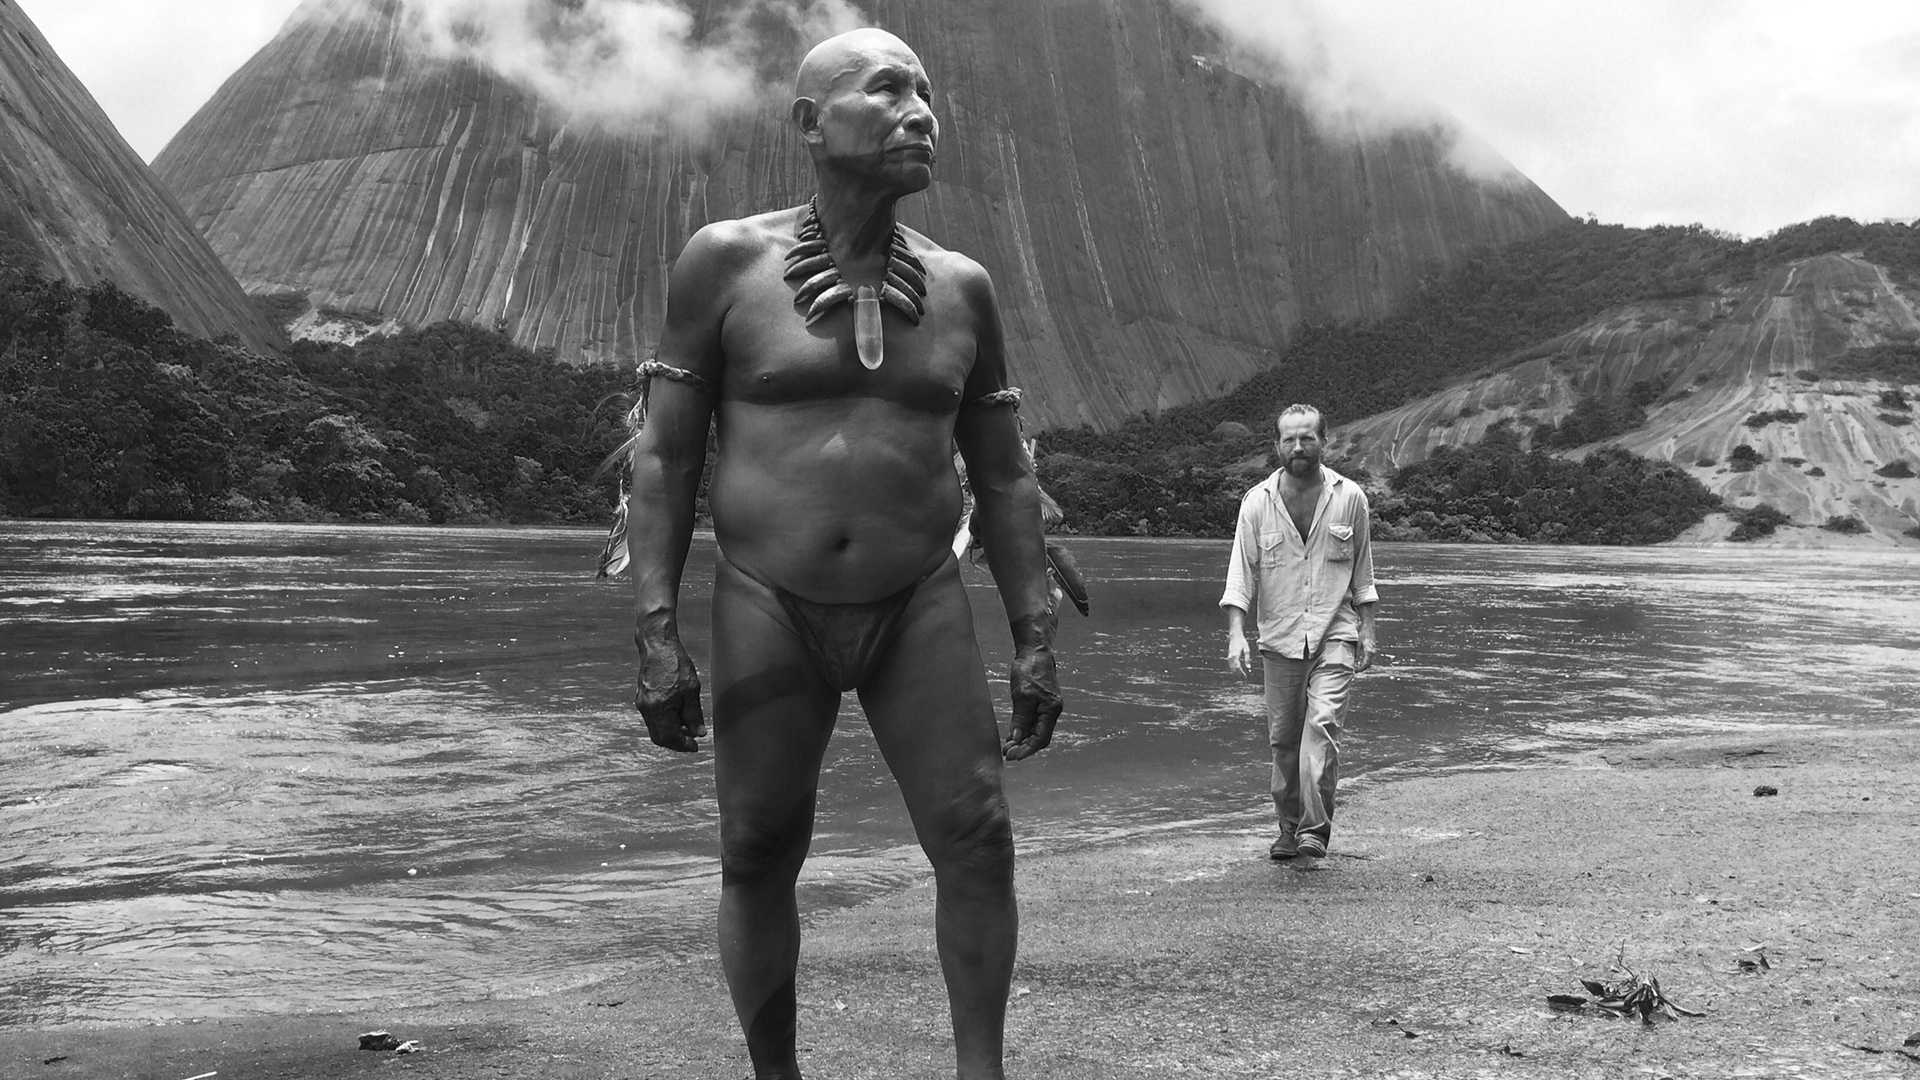 Embrace of the Serpent